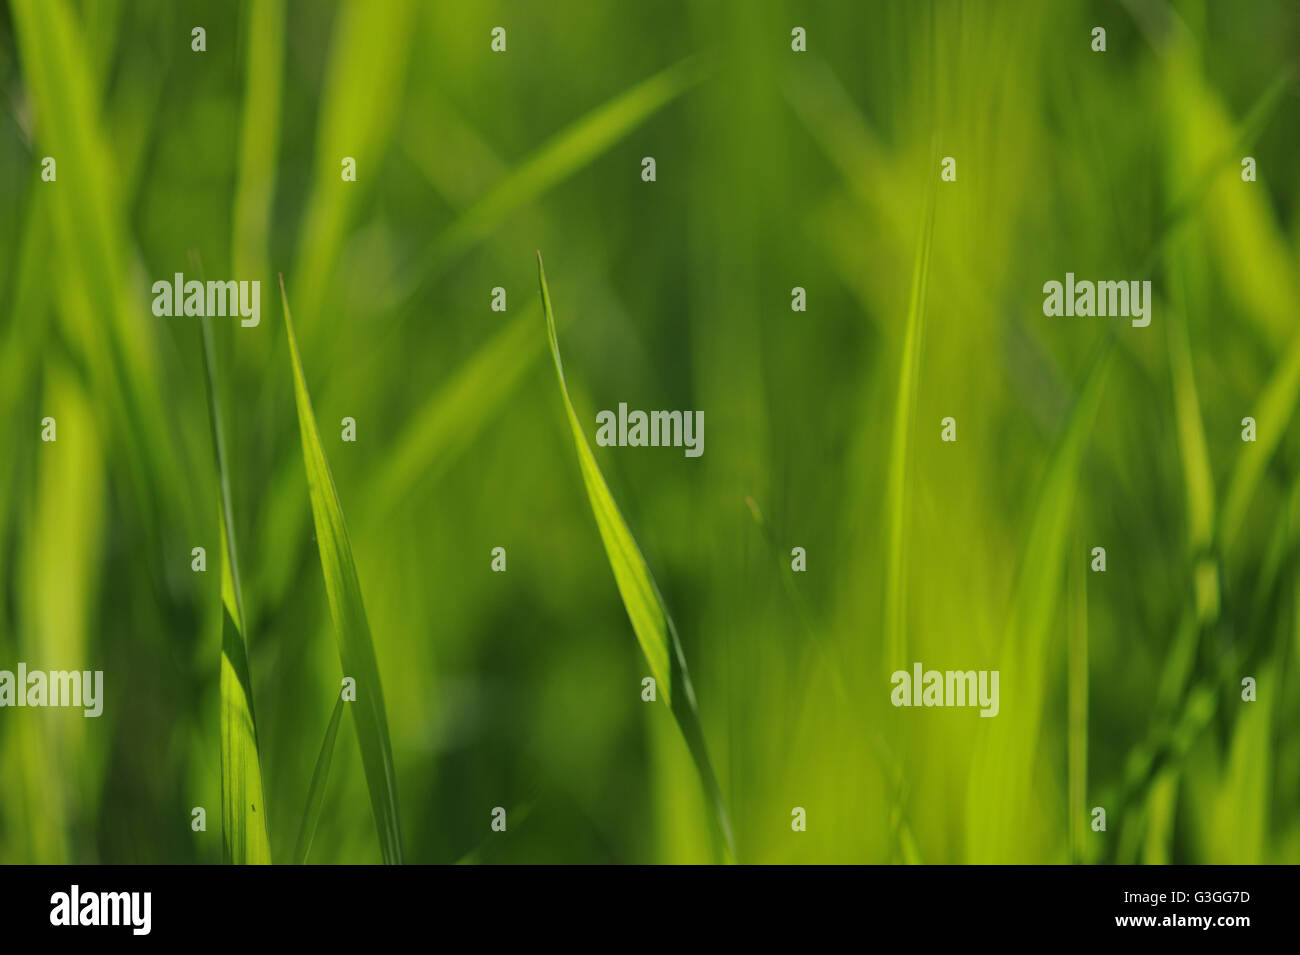 Abstract blur background of green grass Stock Photo - Alamy